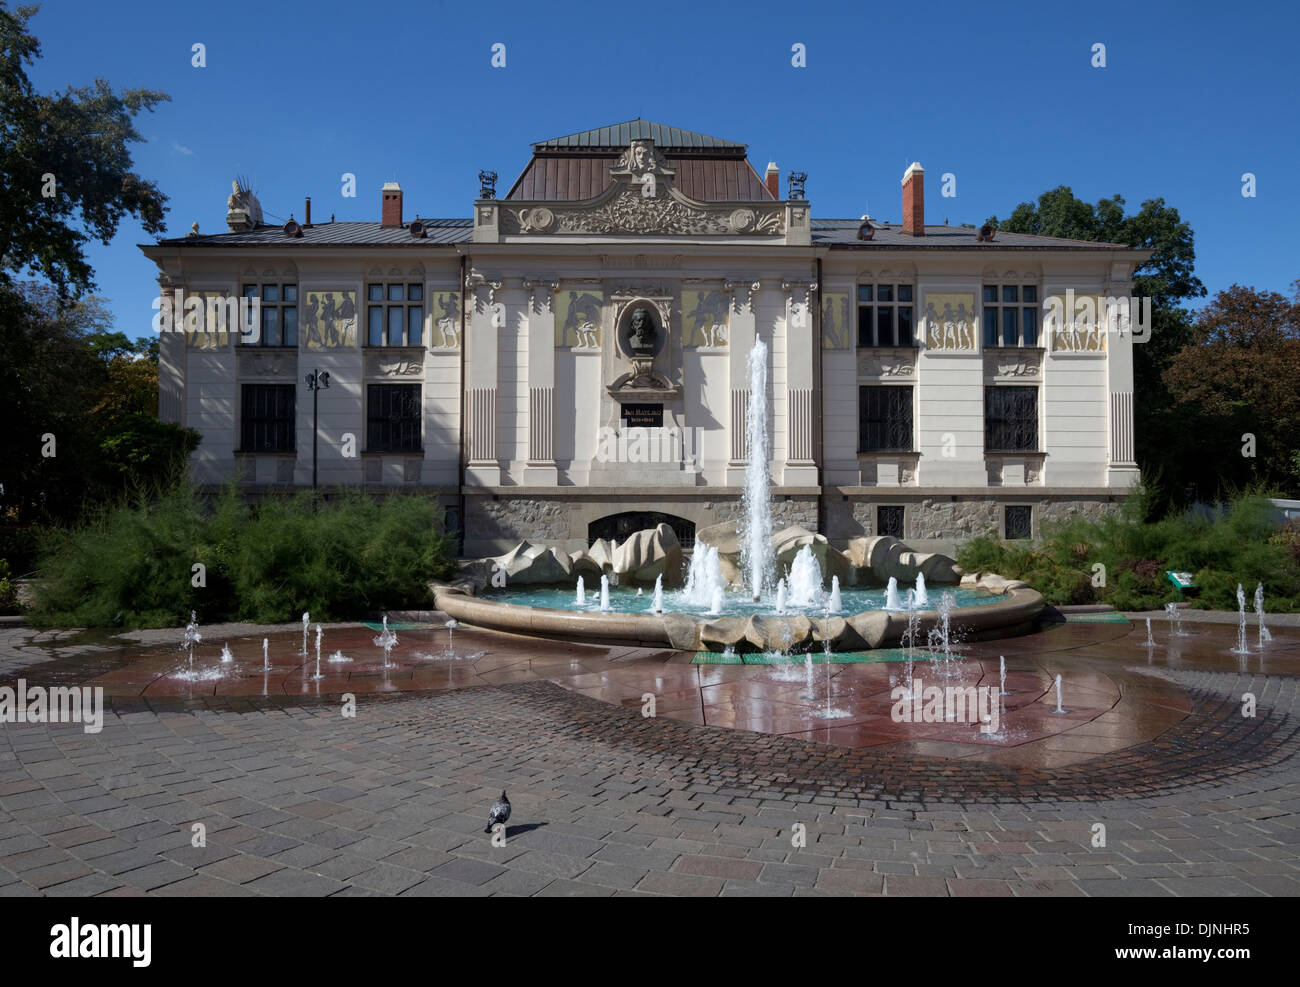 Palac Sztuki, Palace of Art (1901) in Plac Szczepanski, first Art Nouveau building, inspired by ancient Greek temples, Old Town, Krakow, Poland Stock Photo